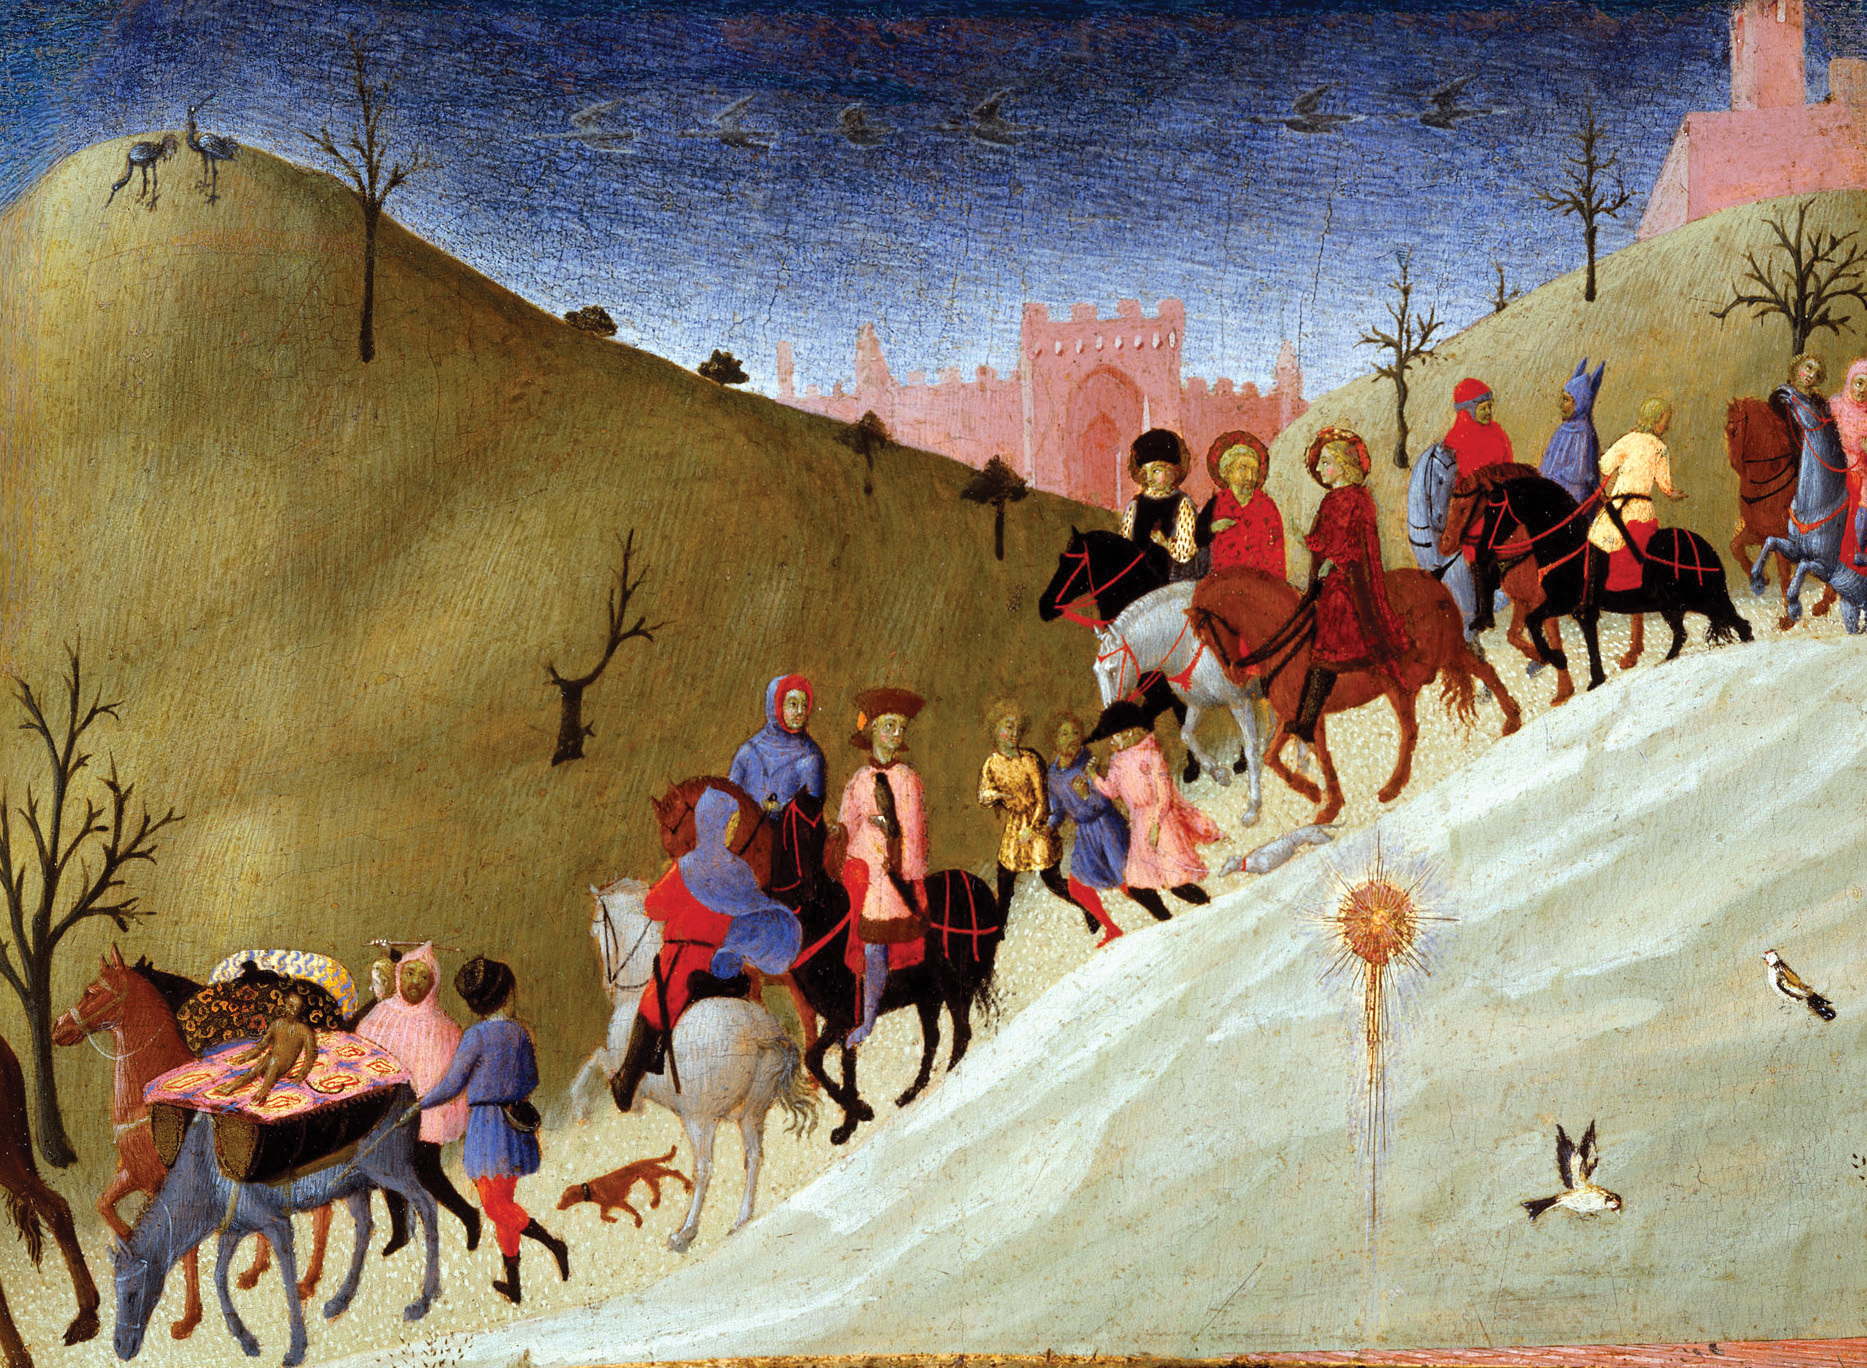 Christians undertake a pilgrimage to Muslim-controlled Jerusalem in a 15th-century painting. Broquiere was questioned frequently as to his intentions by Muslims he encountered during his journey.